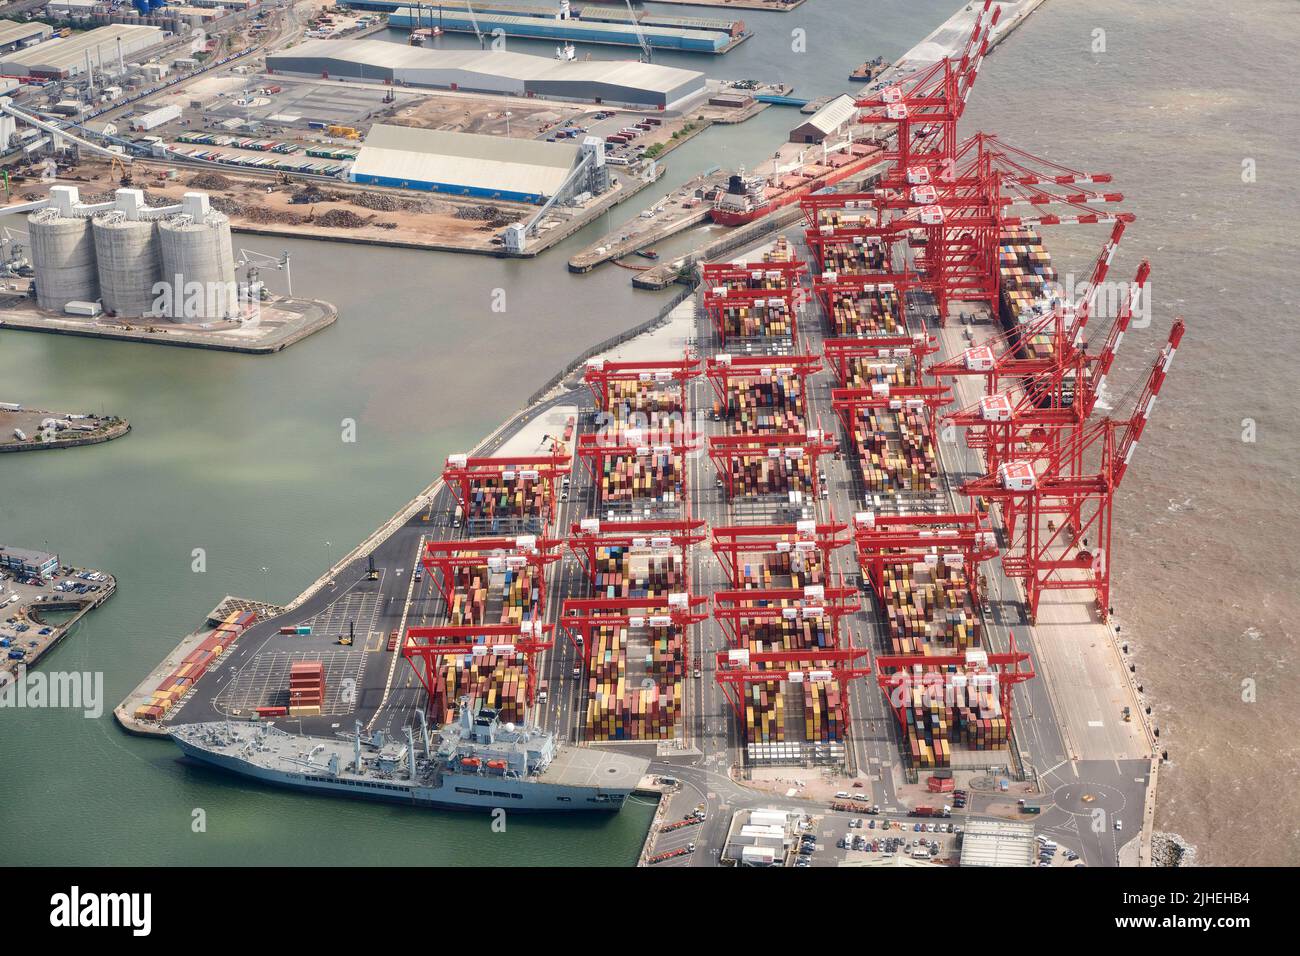 An aerial photograph of Peel Port at Seaforth Docks, Liverpool, Mersey side, north west England, UK Stock Photo